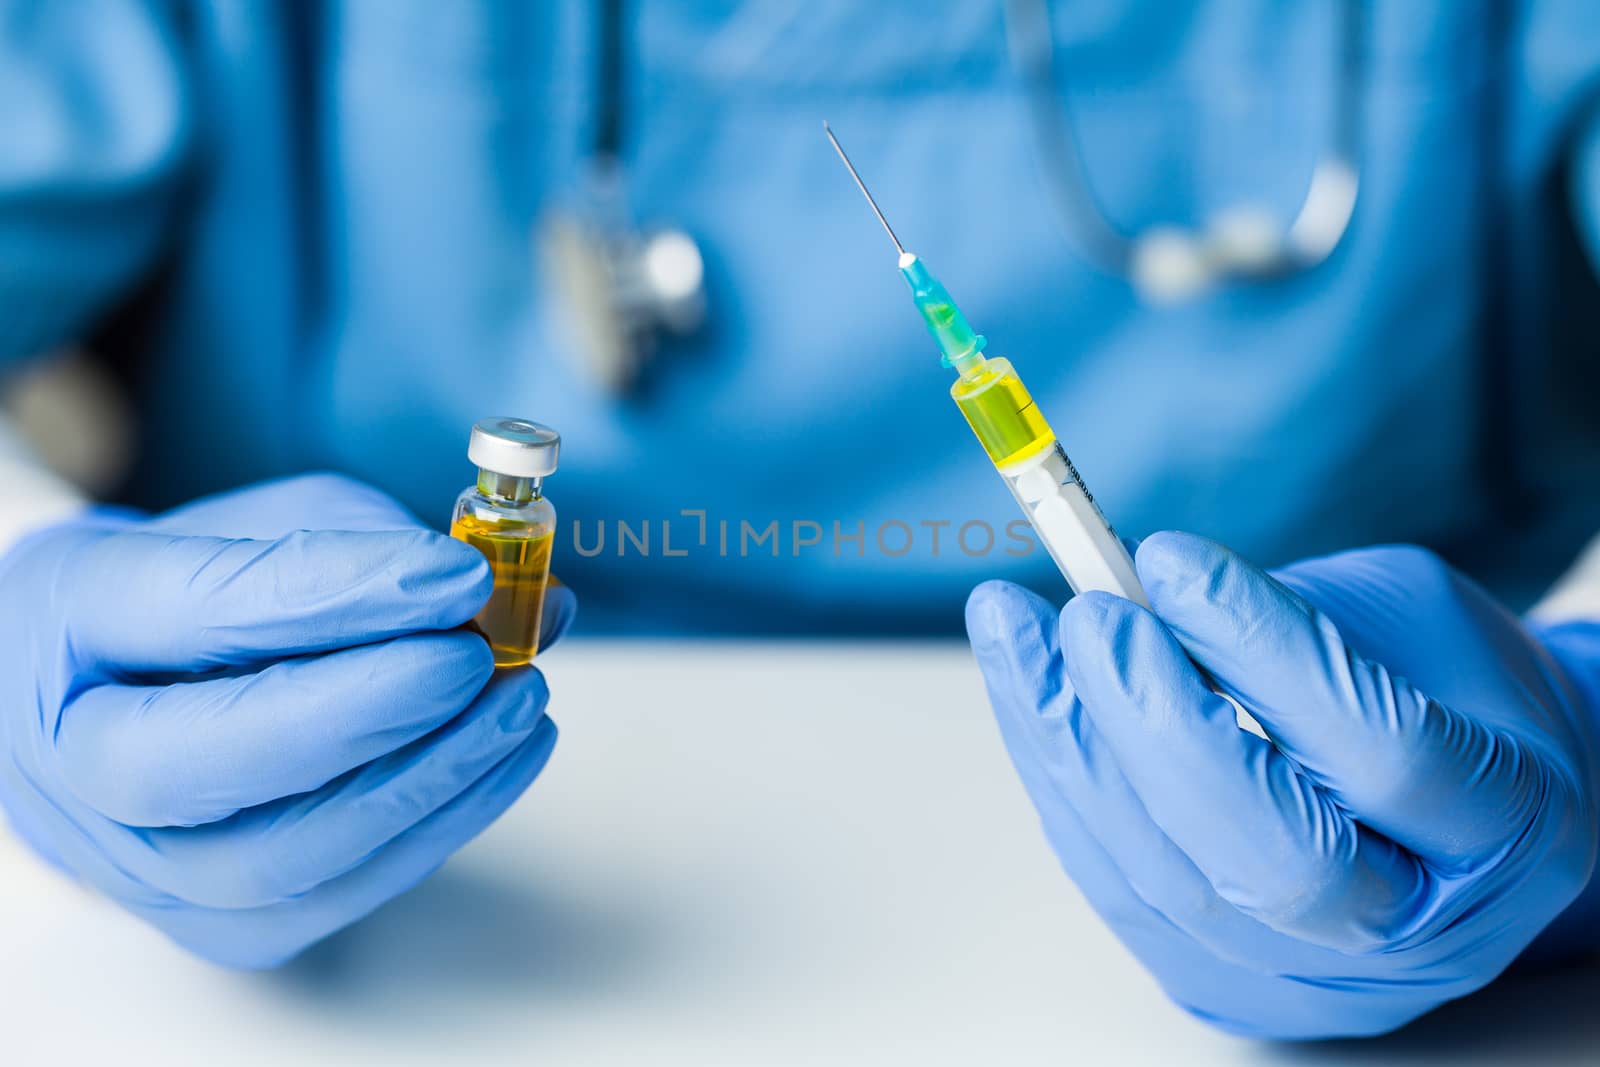 Coronavirus COVID-19 vaccine development,research for cure & treatment of infected patients,groundbreaking discovery in battle against SARS-CoV-2 pathogen,hands in gloves holding ampoule & syringe jab